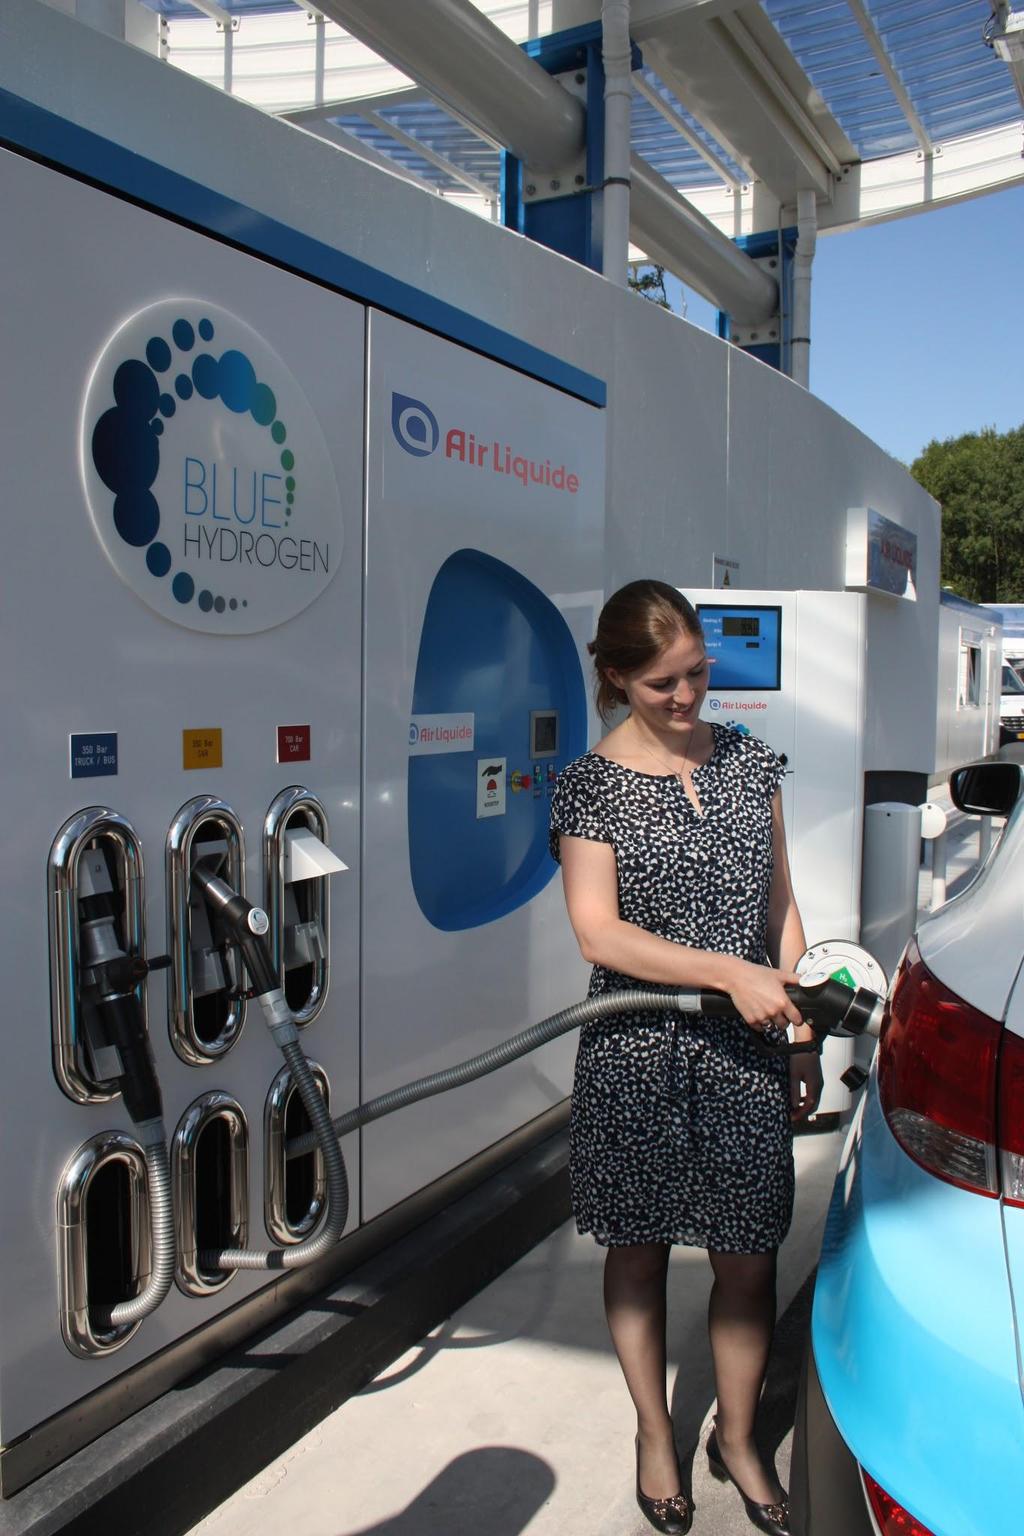 Used in the fuel cell, hydrogen combines with oxygen from the air to produce electricity, with water as the only byproduct.